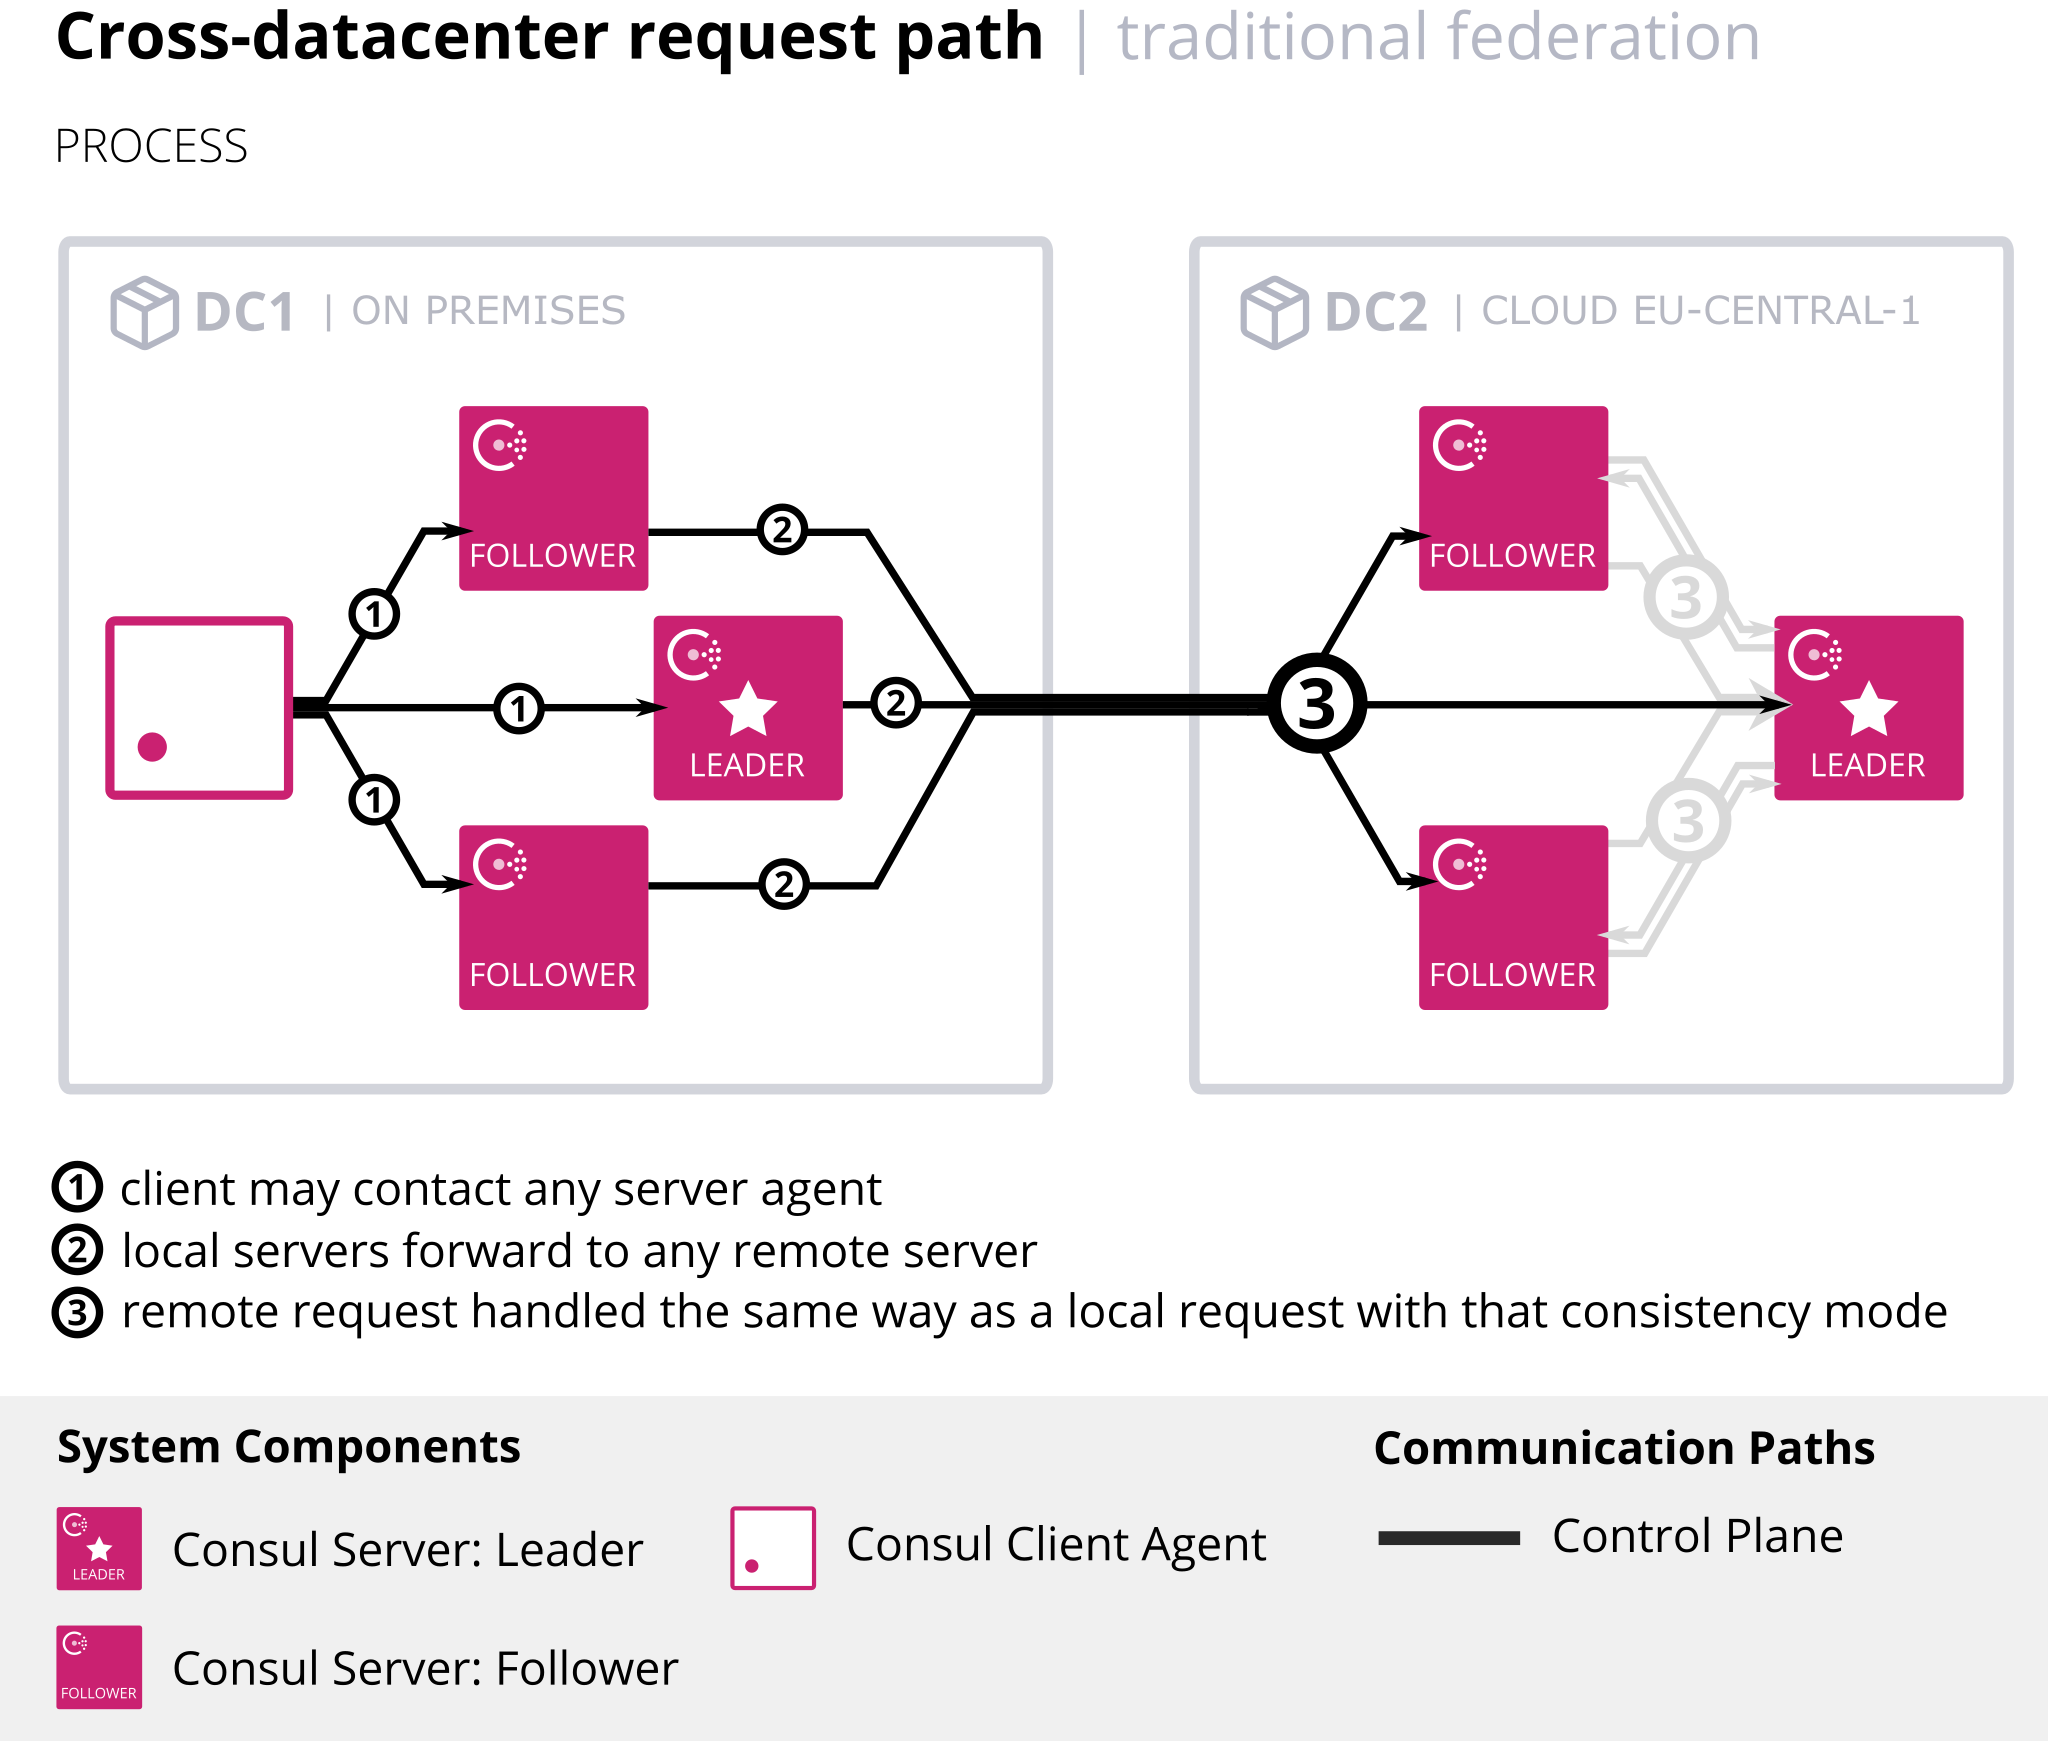 consistency mode behavior across Consul datacenters with traditional WAN federation